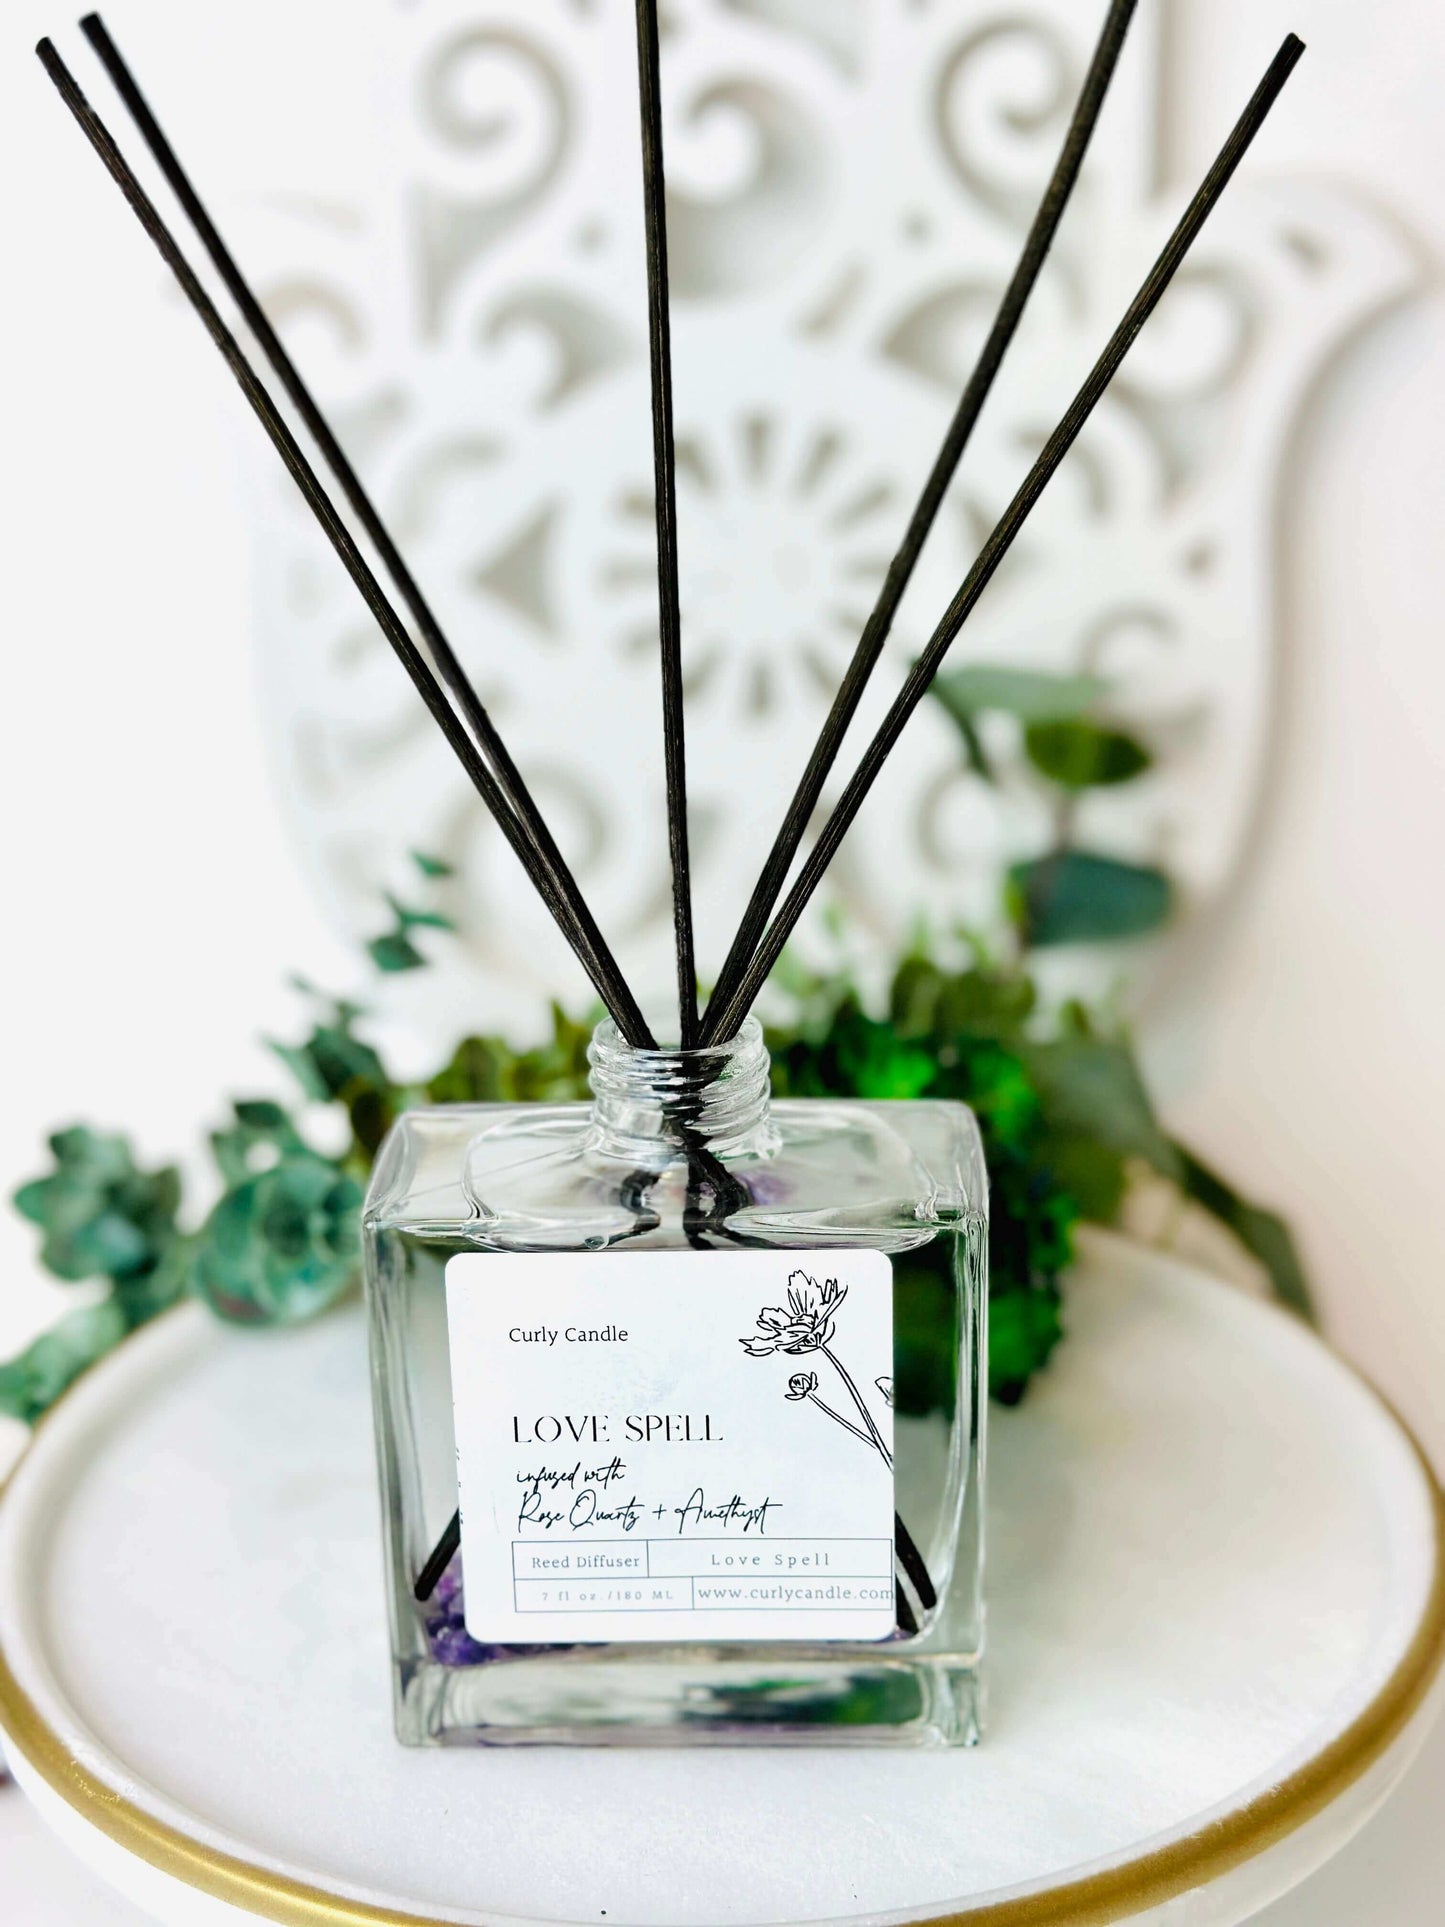 Love spell crystal candle & reed diffuser gift box